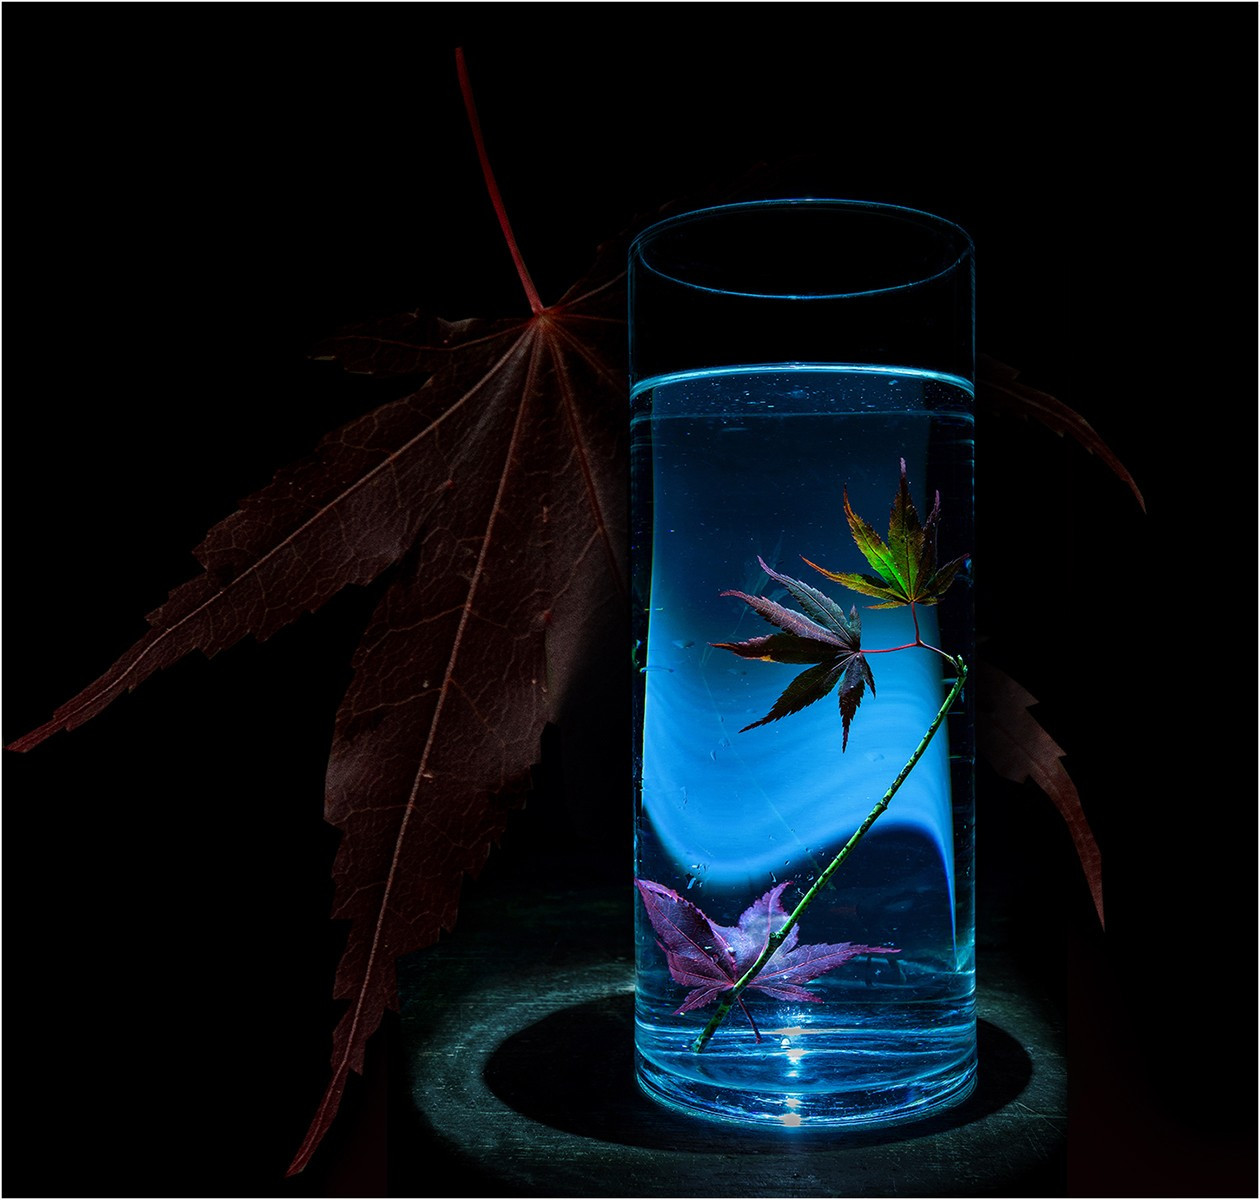 2.Iluminated acer leaf in a glass vace.